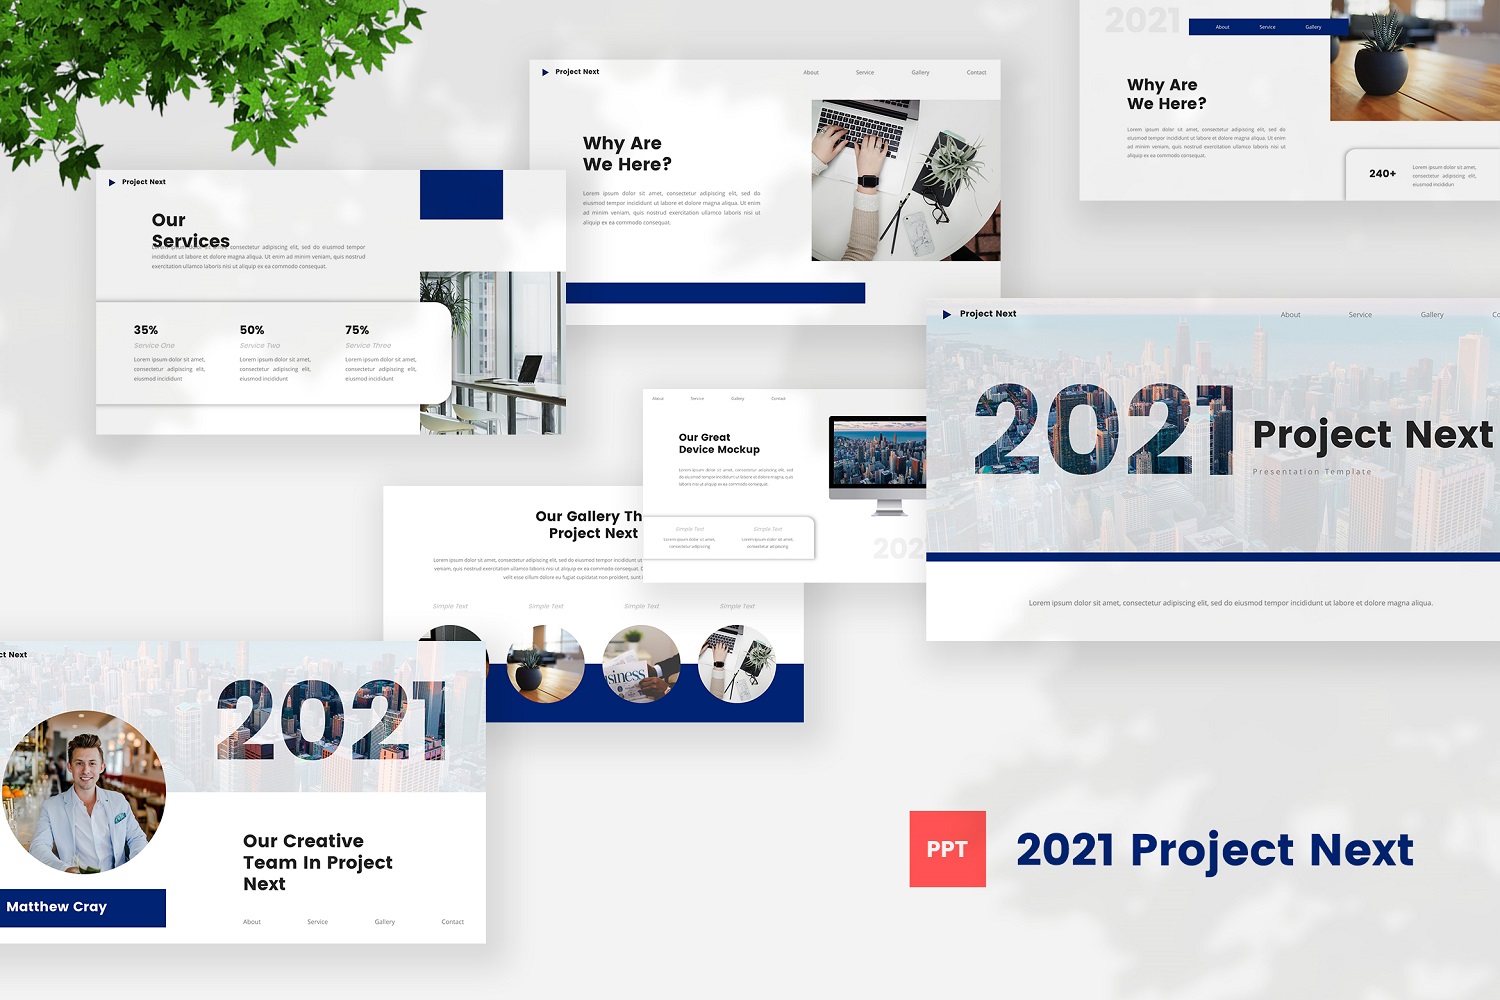 2021 Project Next Powerpoint Template